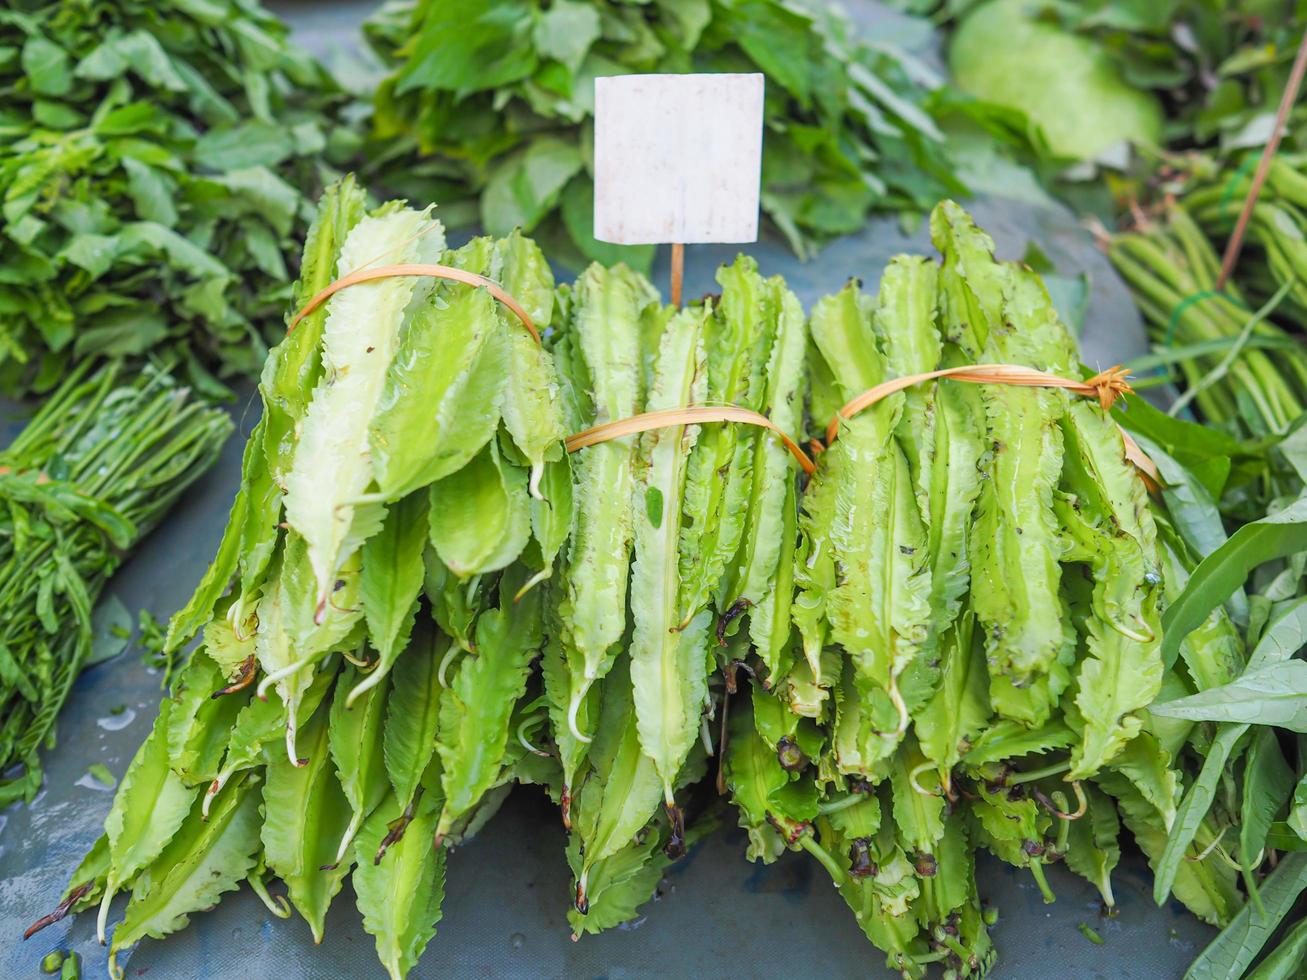 Winged bean or green wings bean for sale in the fresh market photo